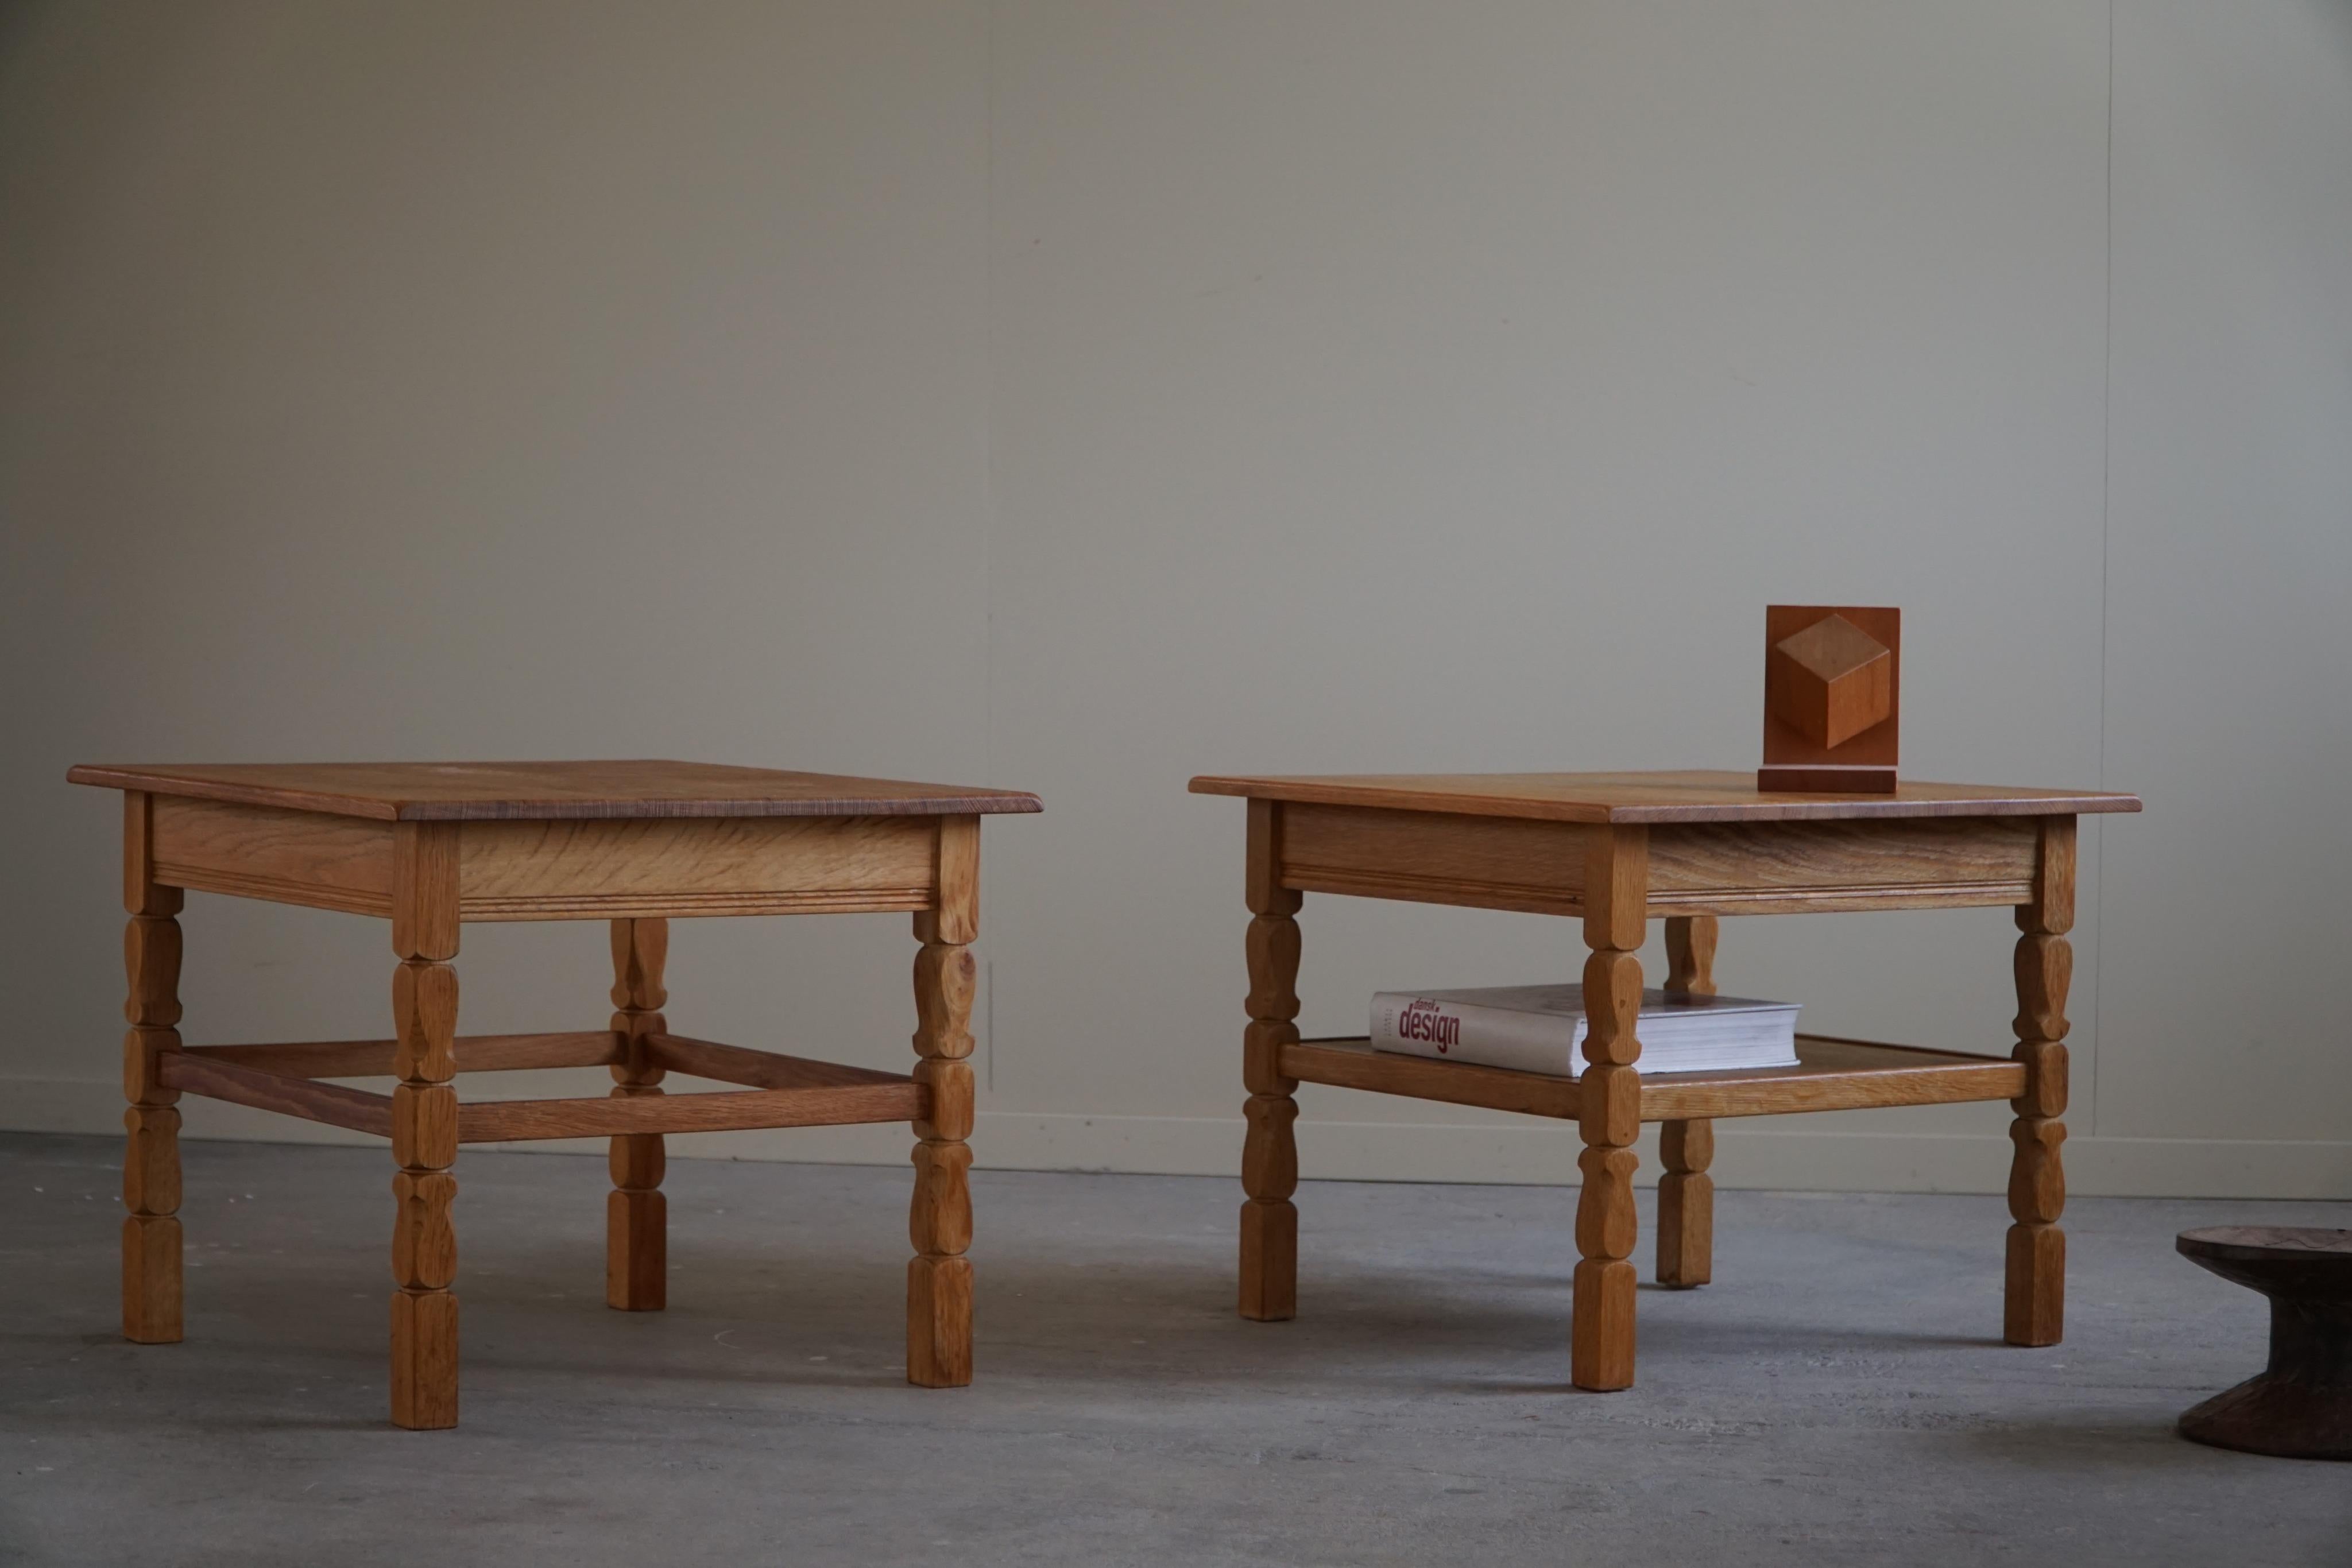 A pair of square sofa / side tables in solid oak. Made by a Danish cabinetmaker in the 1960s. 

Curved legs and great craftsmanship in these brutalist tables.
Light signs of wear on the surface.
These lovely tables will complement many interior